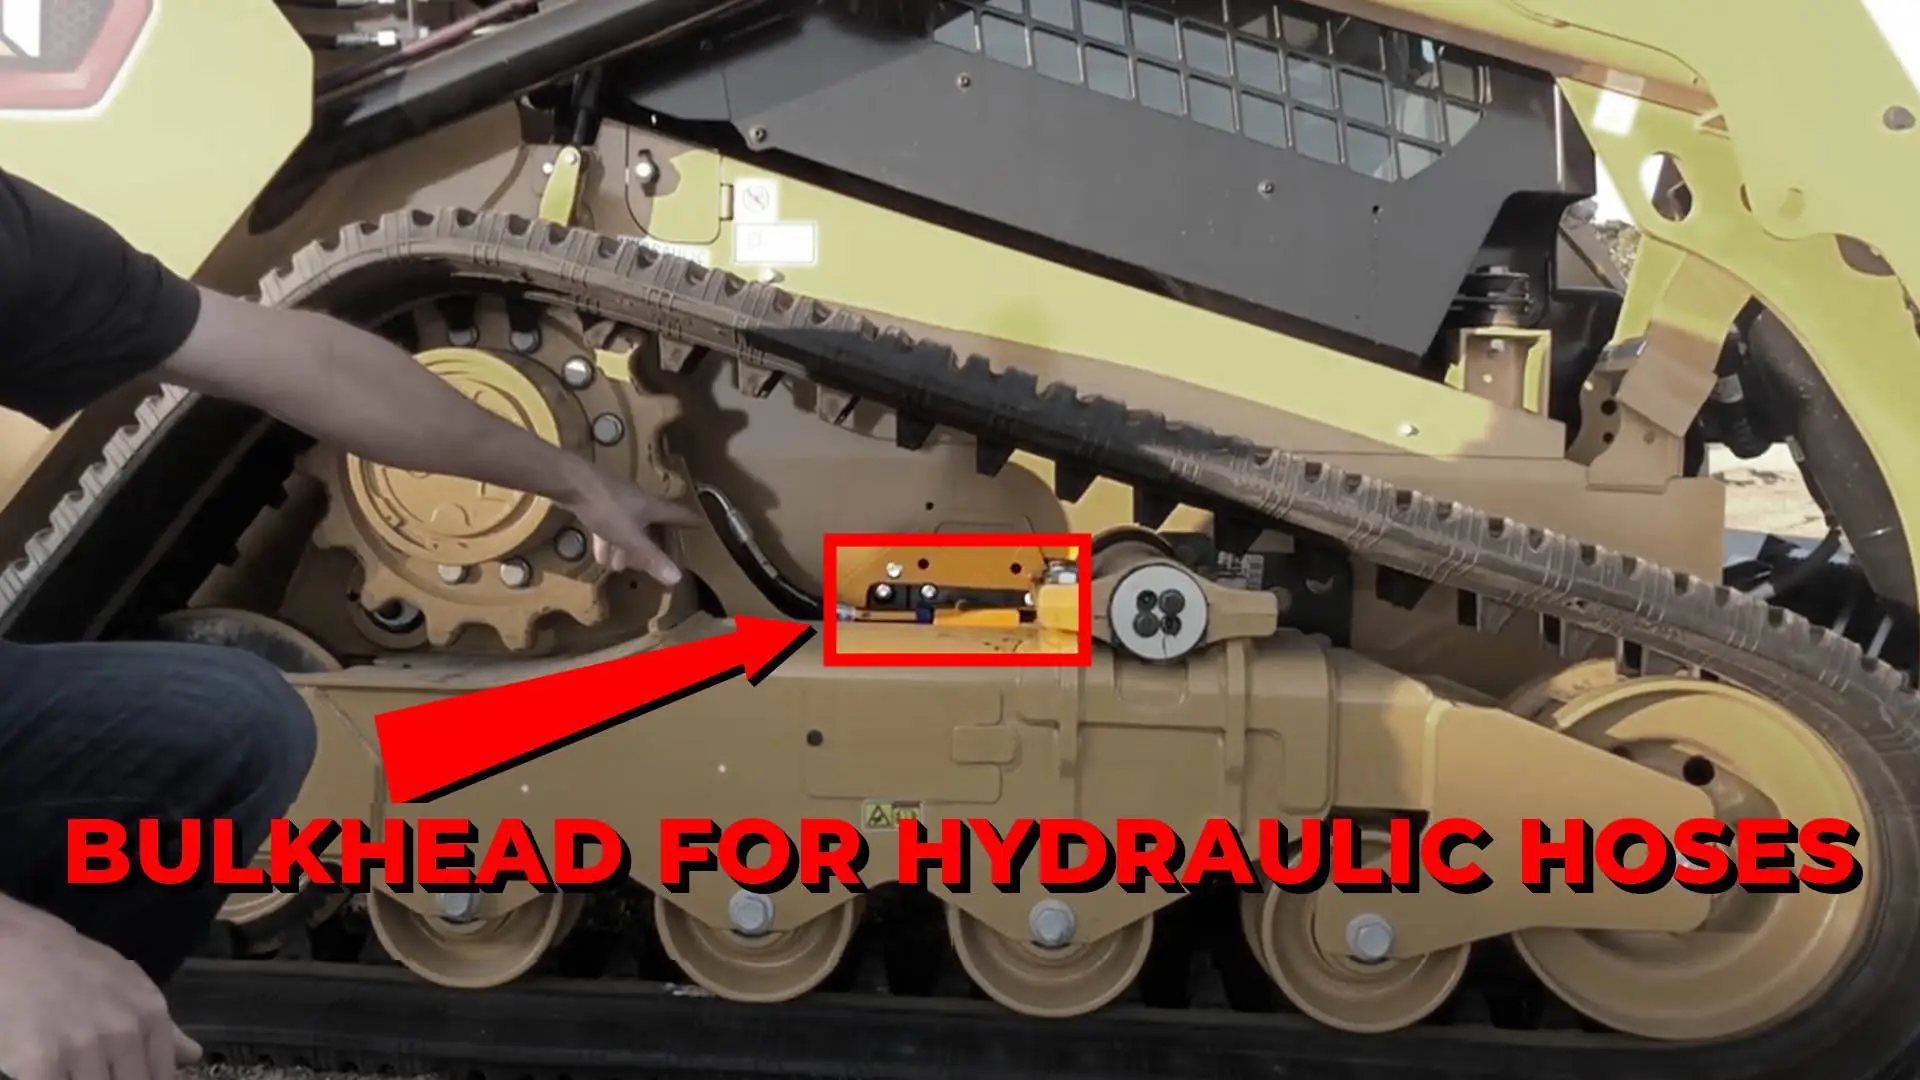 An arrow shows the optional rubber bulkhead for the hydraulic hoses of the Cat 259D3.